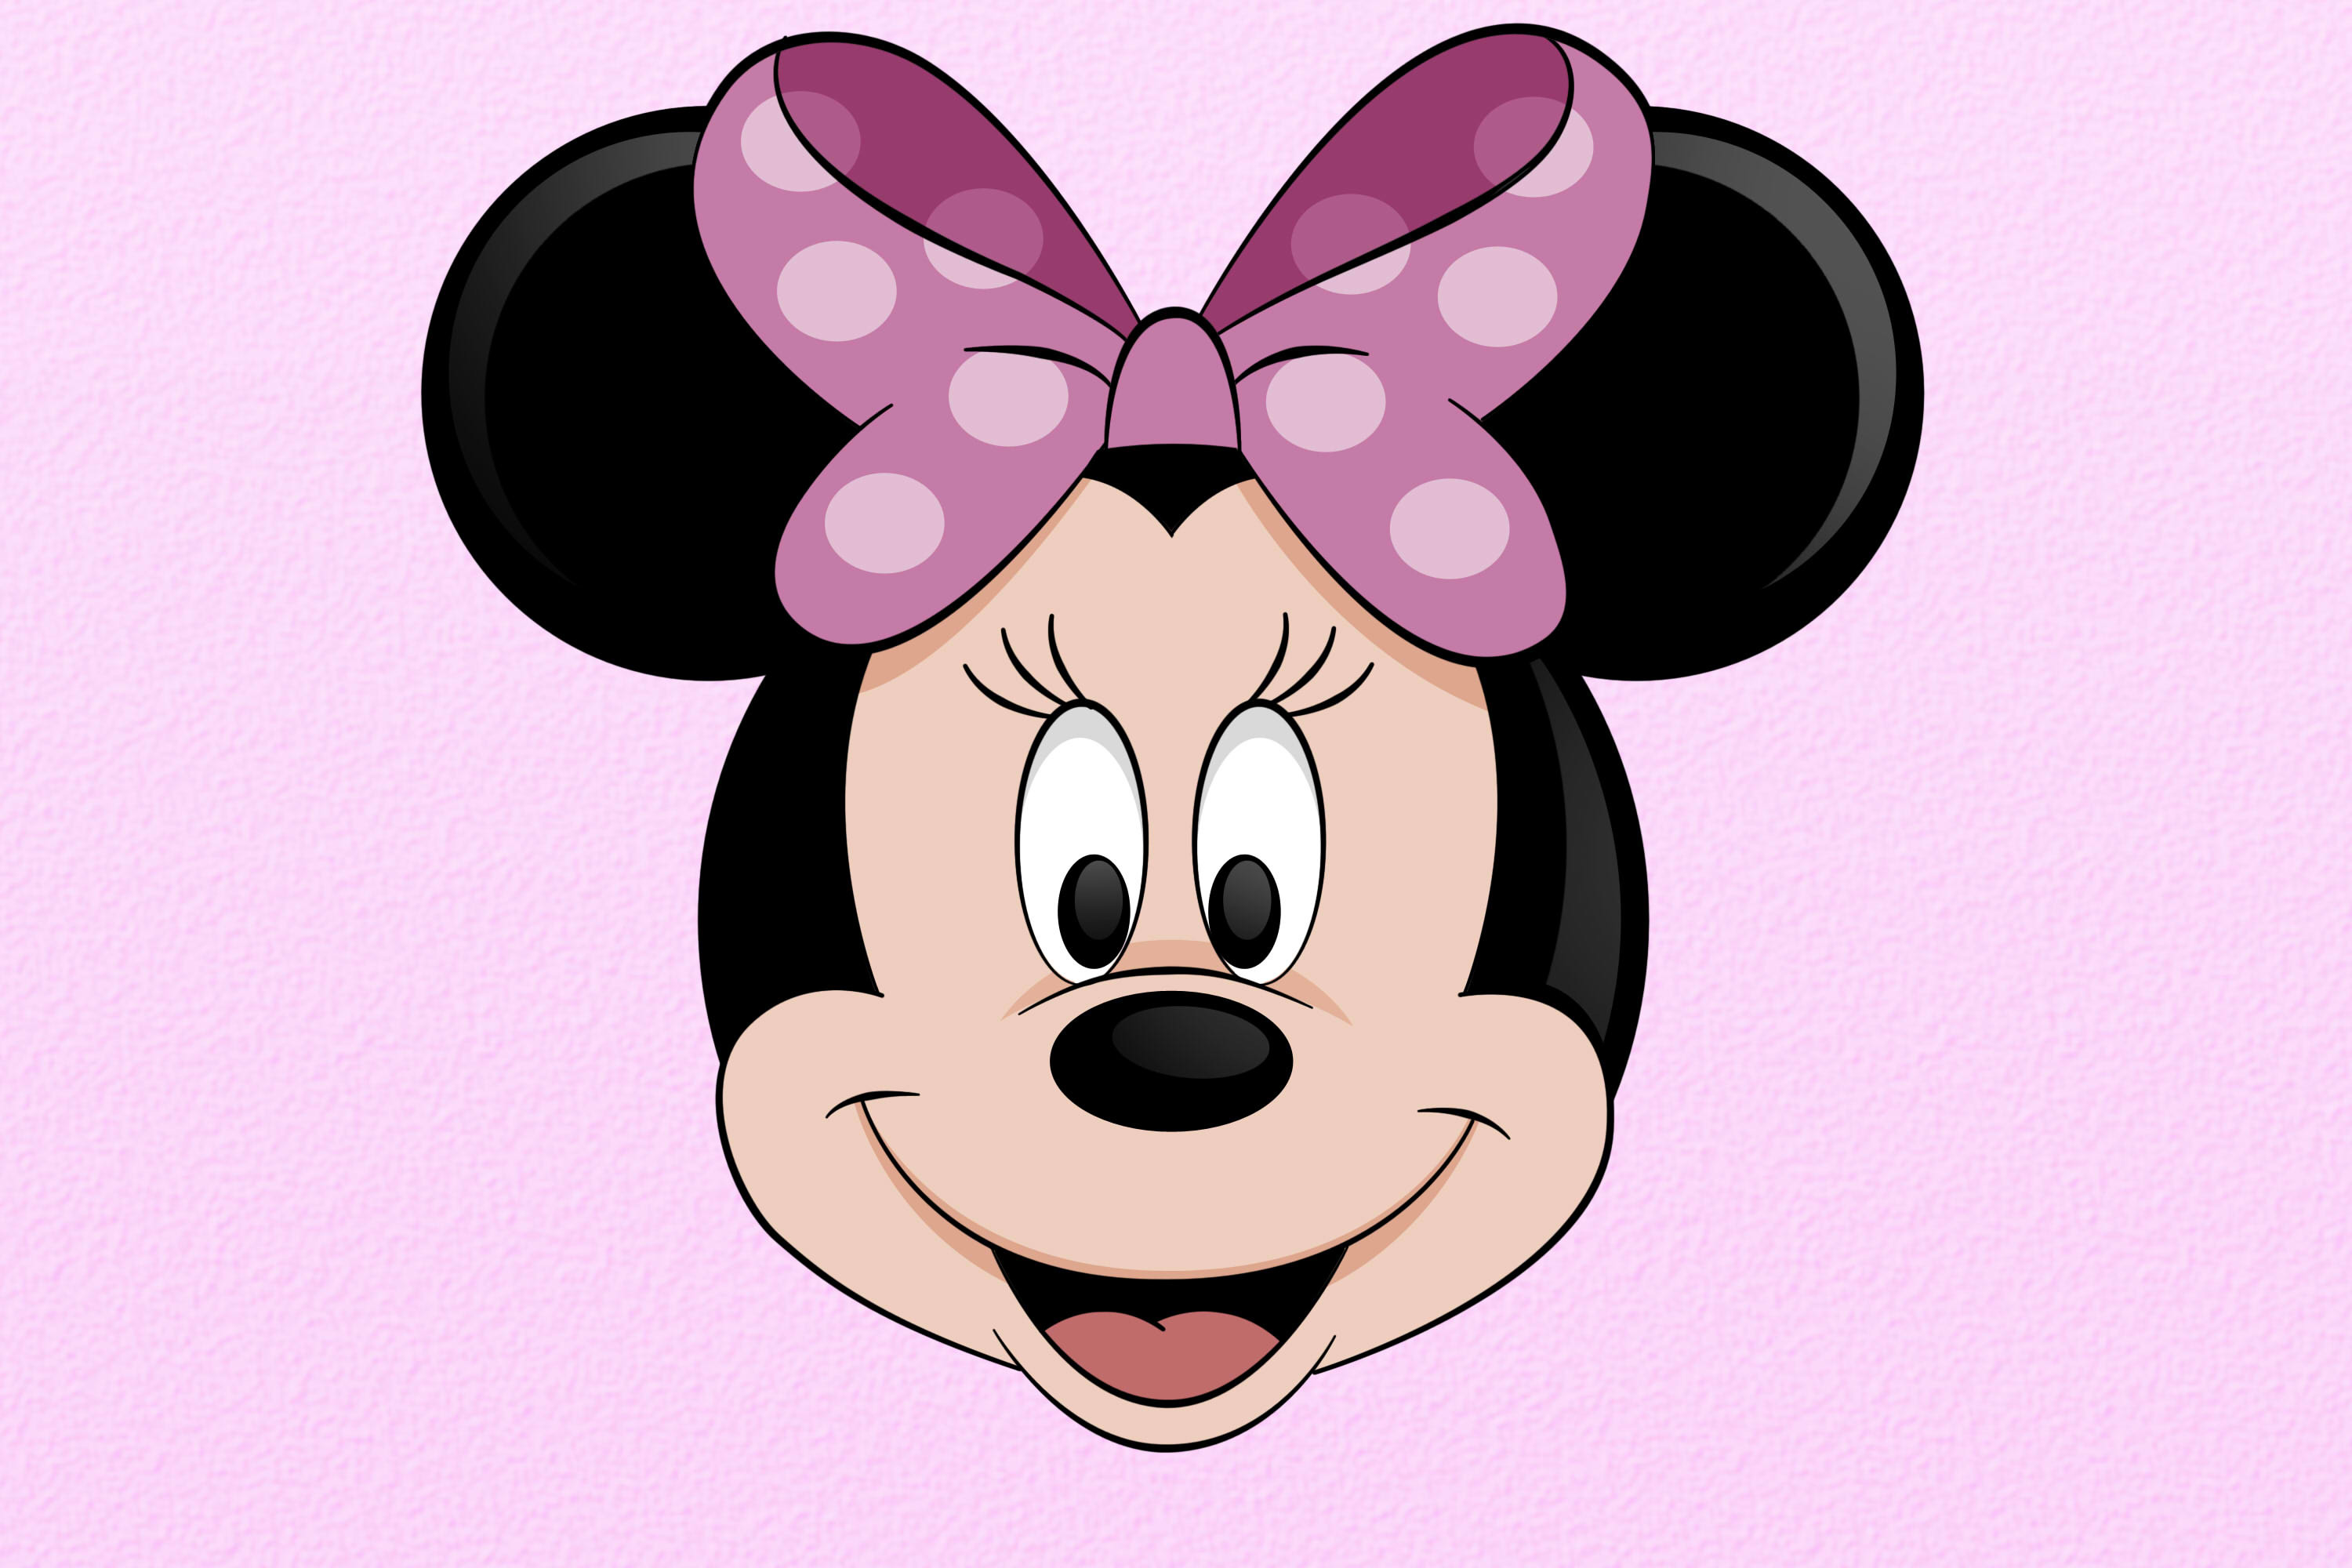 Clip Arts Related To Mickey Mouse And Minnie Mouse Wallpapers Is A Wonderful Hd 3000x2000